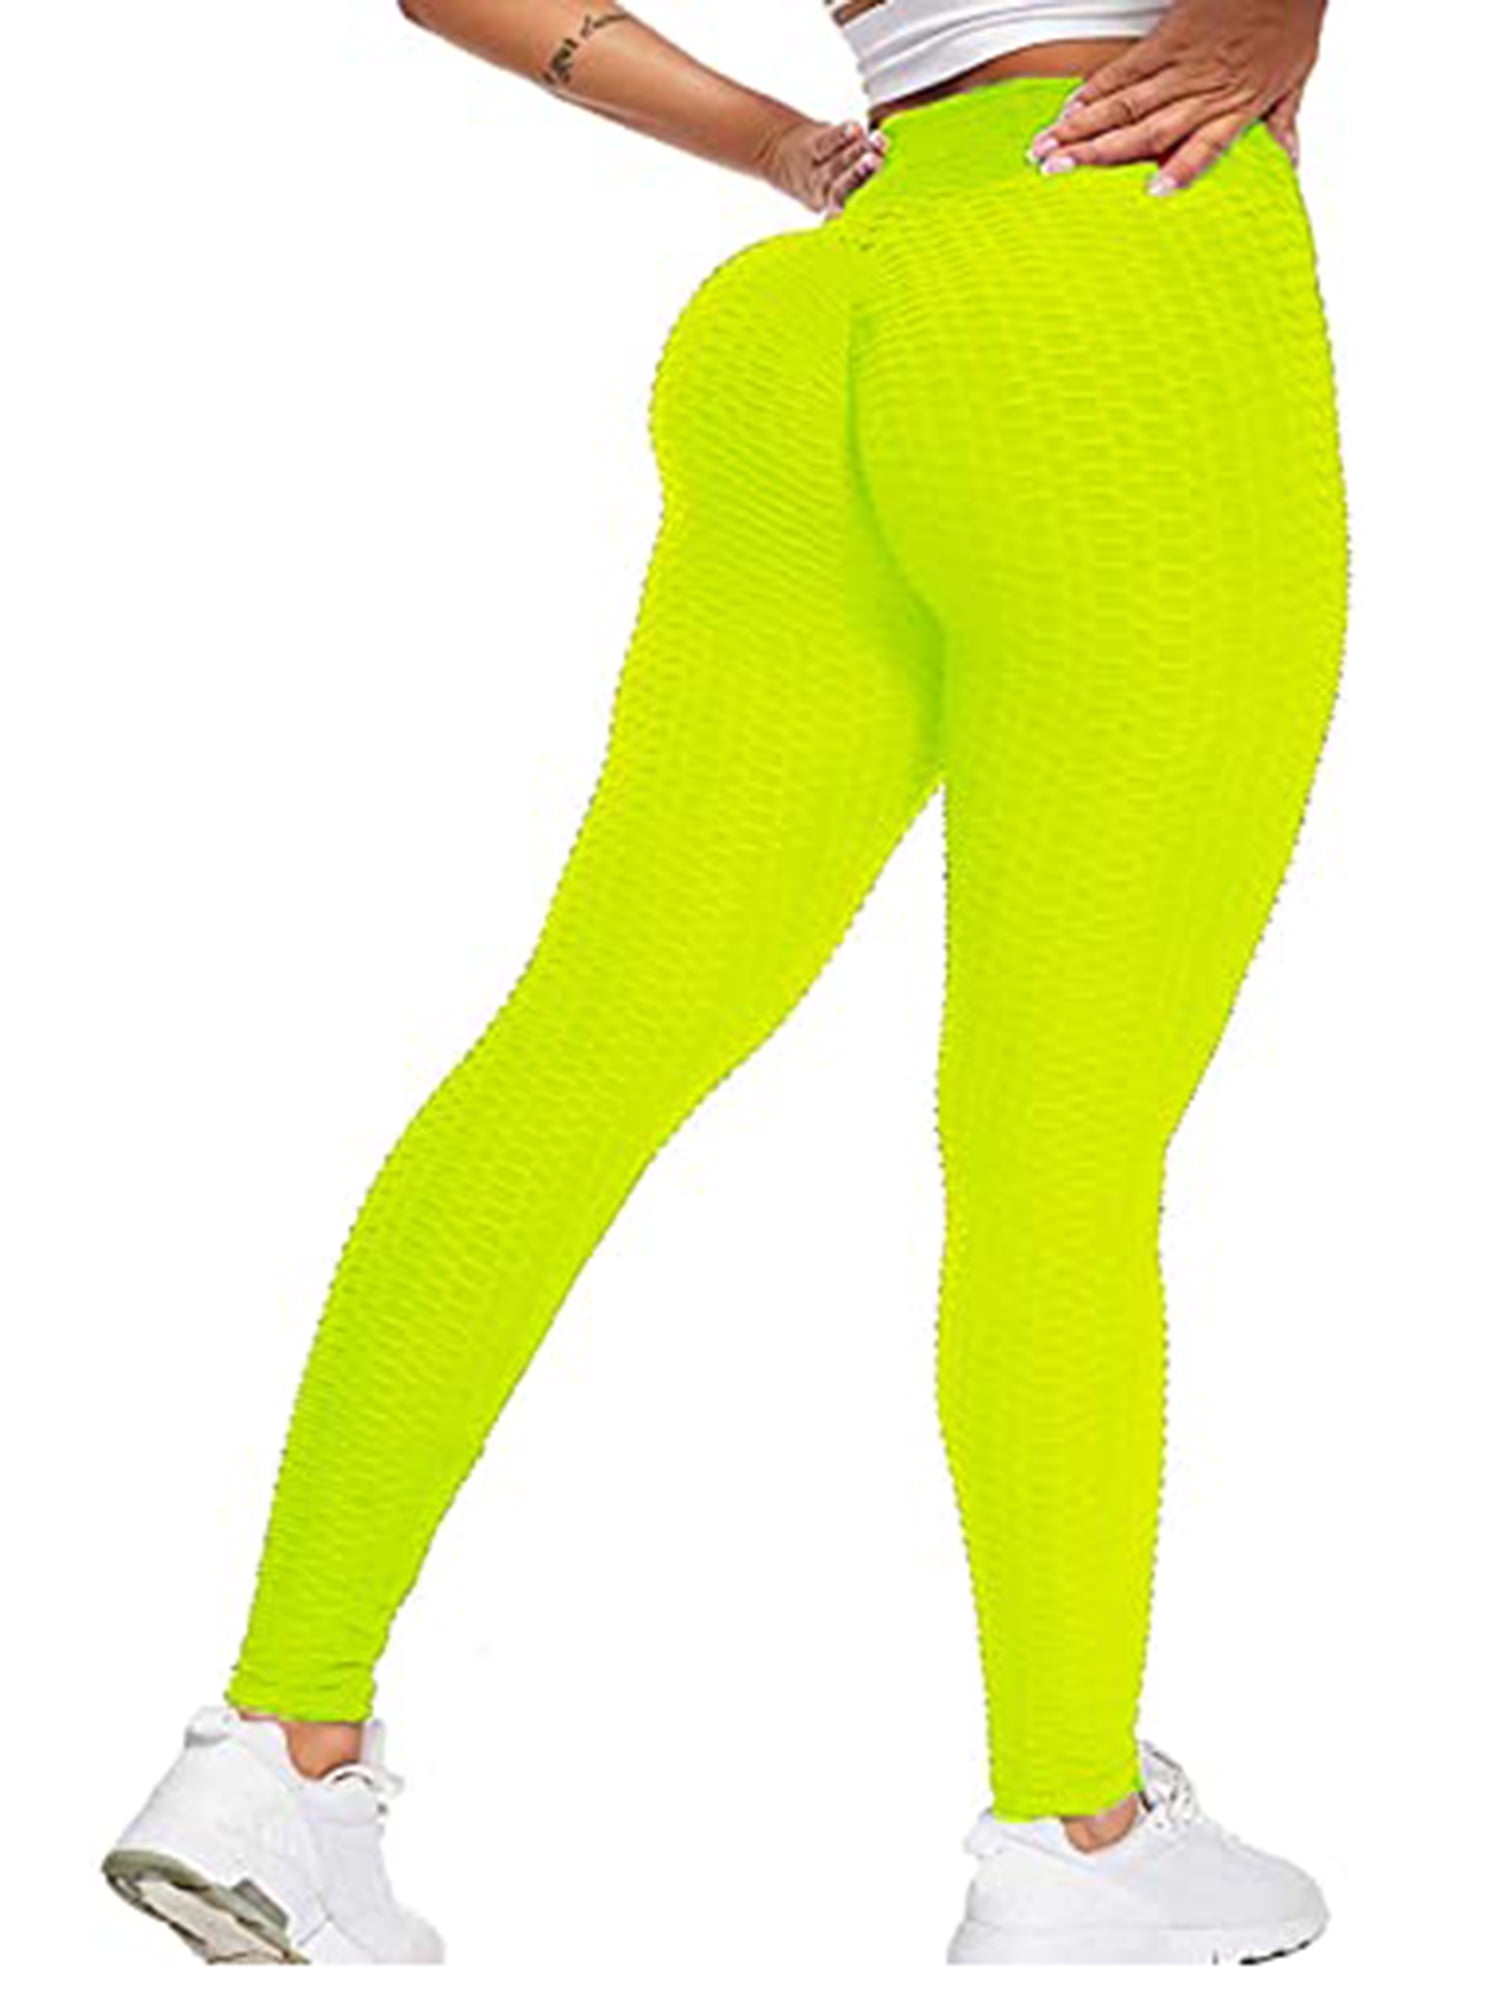 YouLoveIt Womens High Waist Yoga Pants Tummy Control Butt Lift Booty Pants  Stretchy Leggings Textured Booty Tights Casual Yoga Jogging Leggings Pants